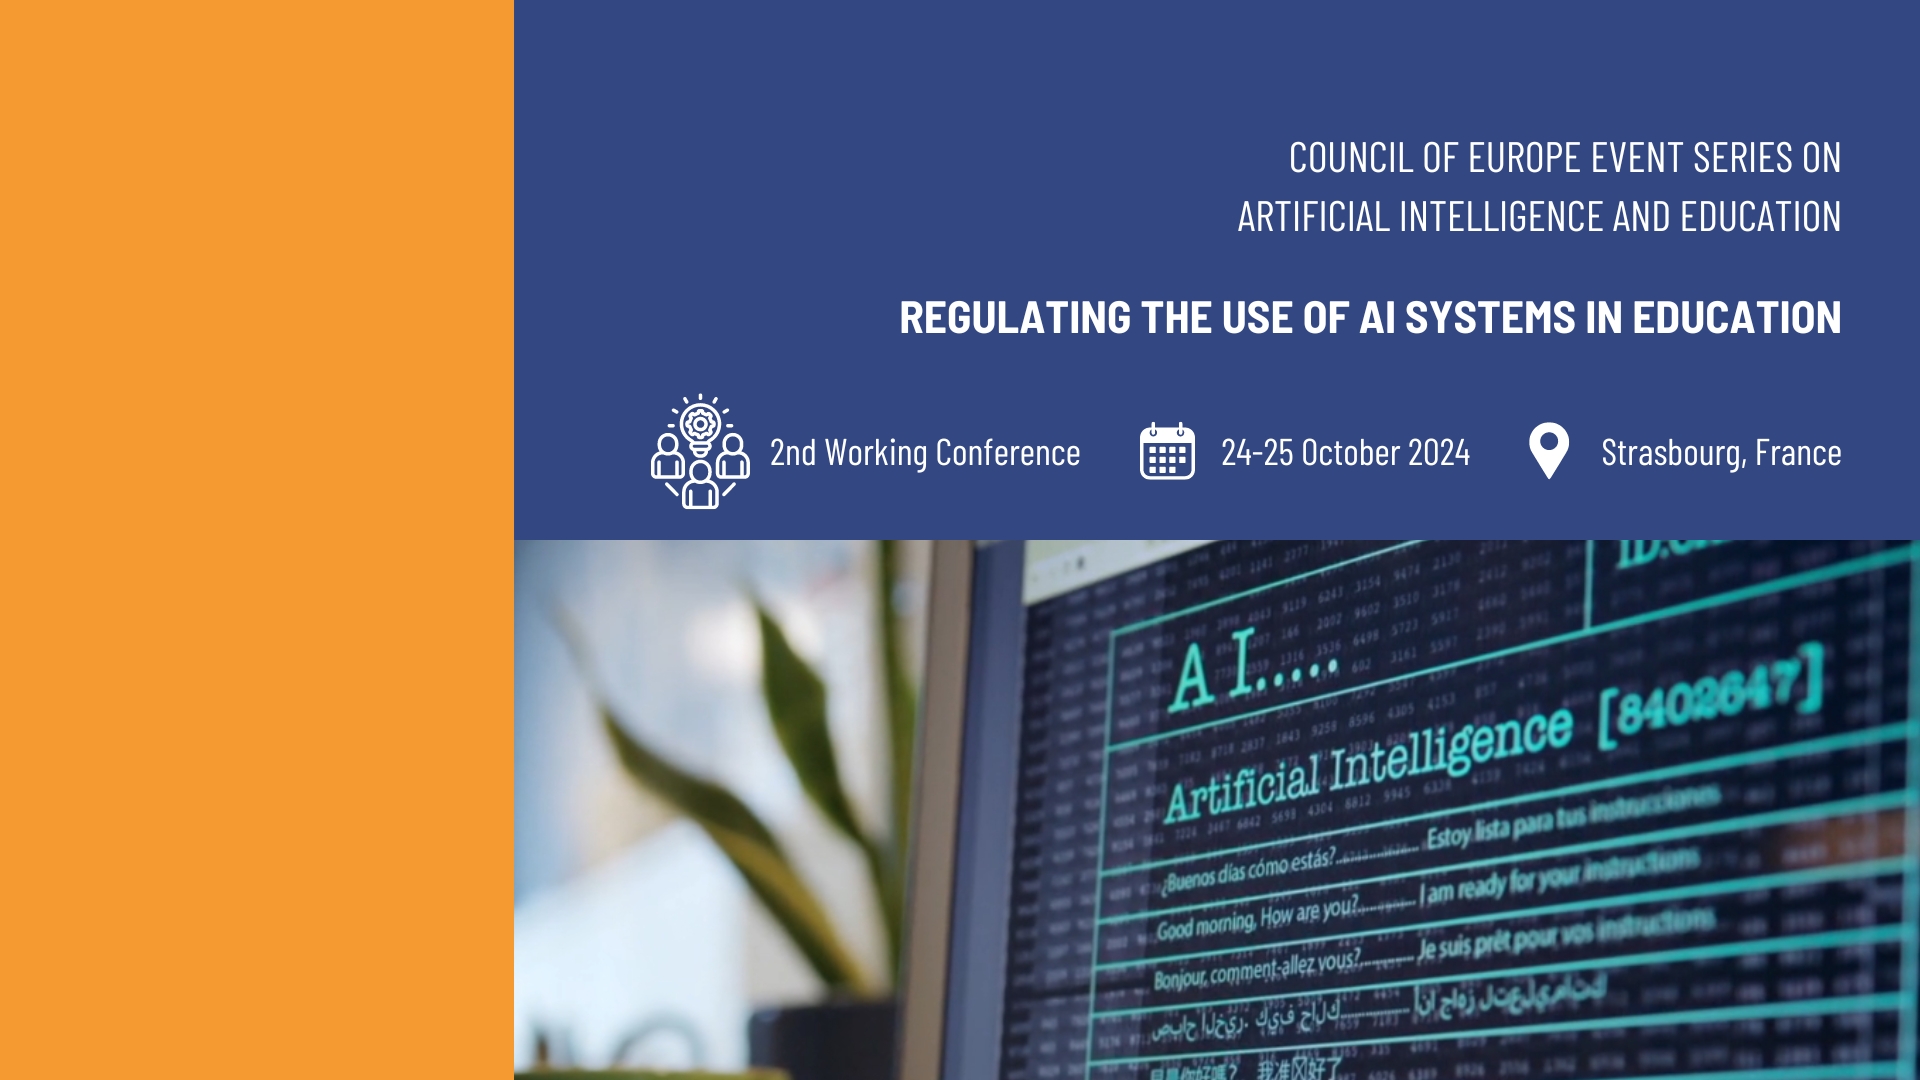 Working Conference on Regulating the use of AI systems in education